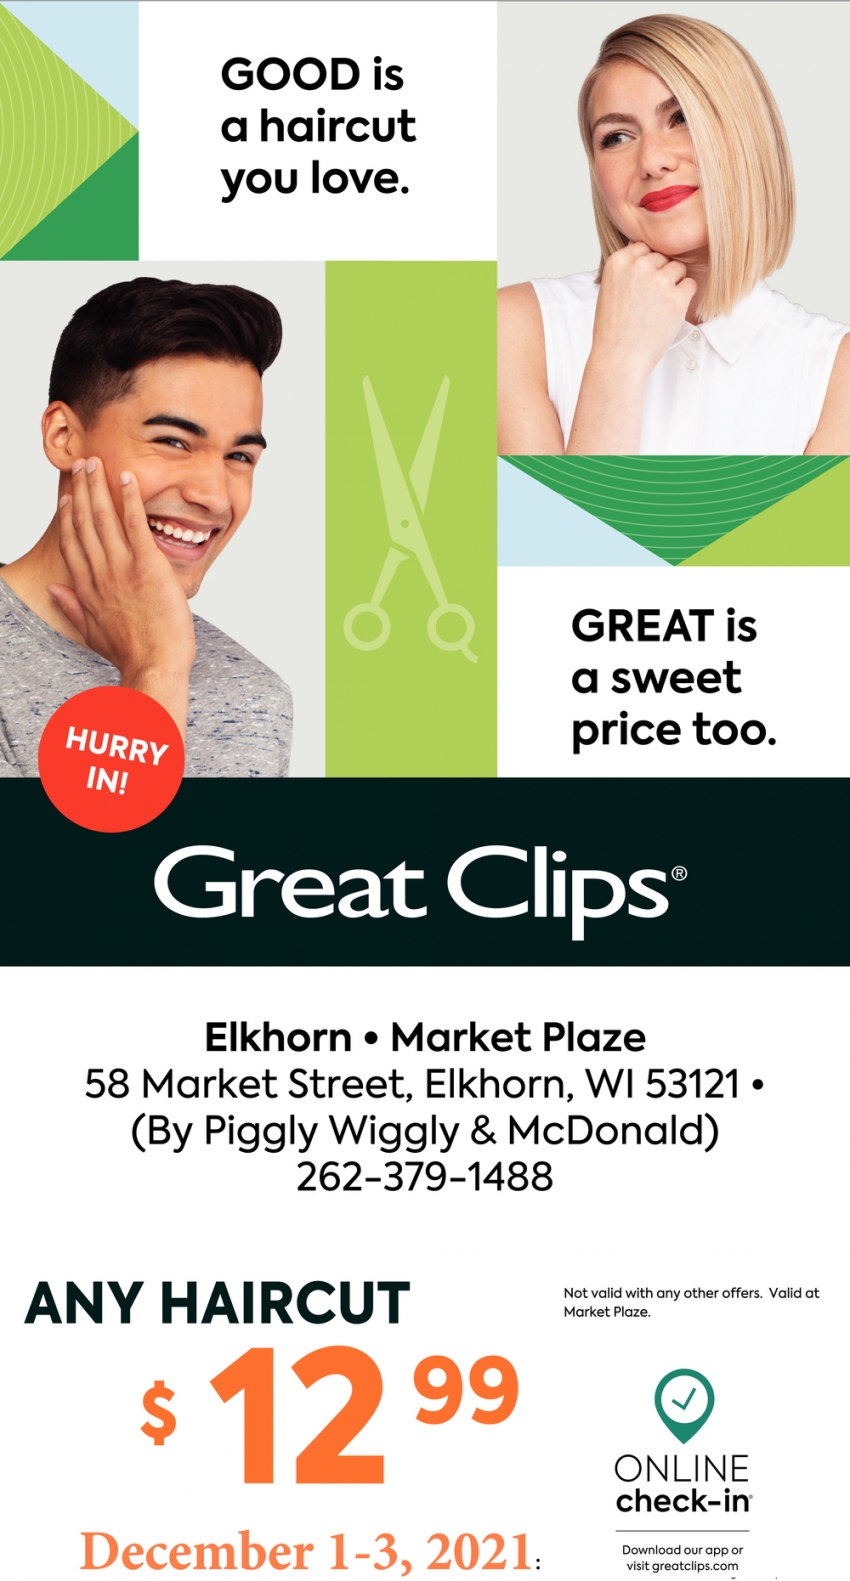 Any Haircut $, Great Clips